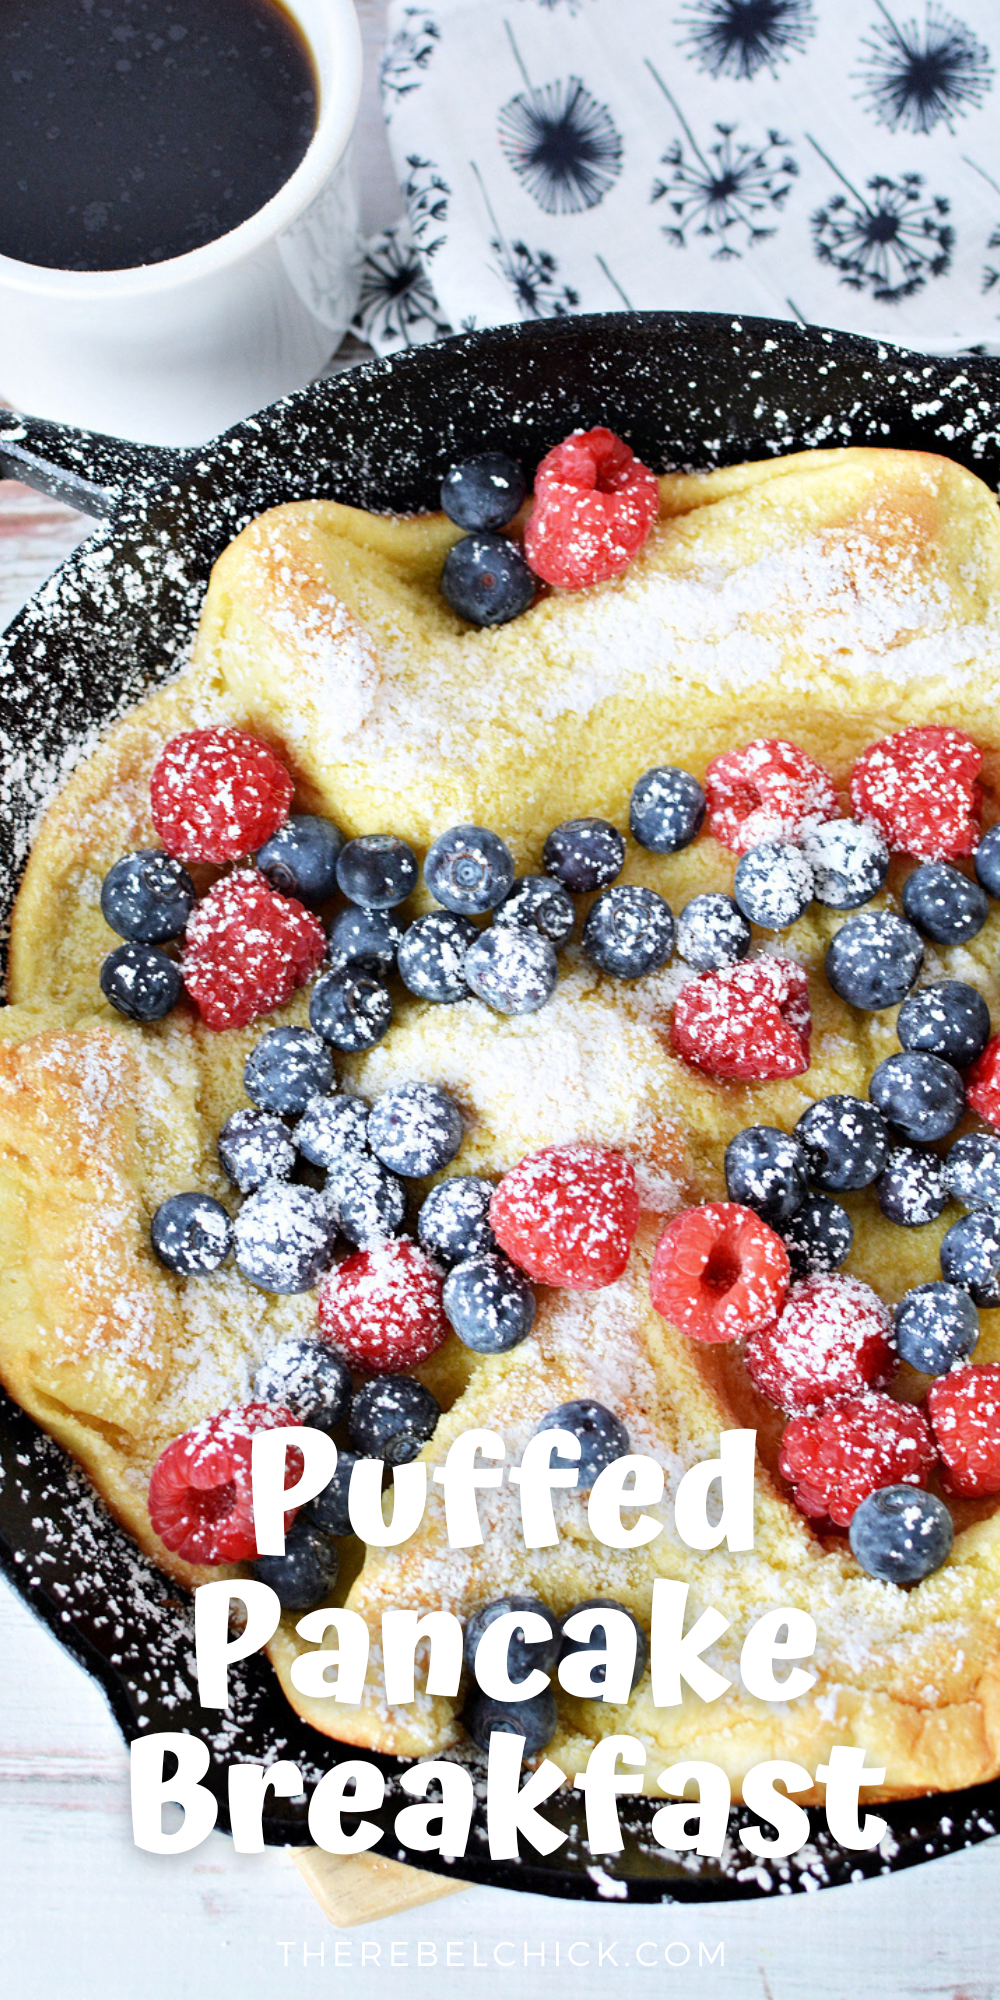 Puffed pancake filled with fresh berries and sprinkled with powdered sugar